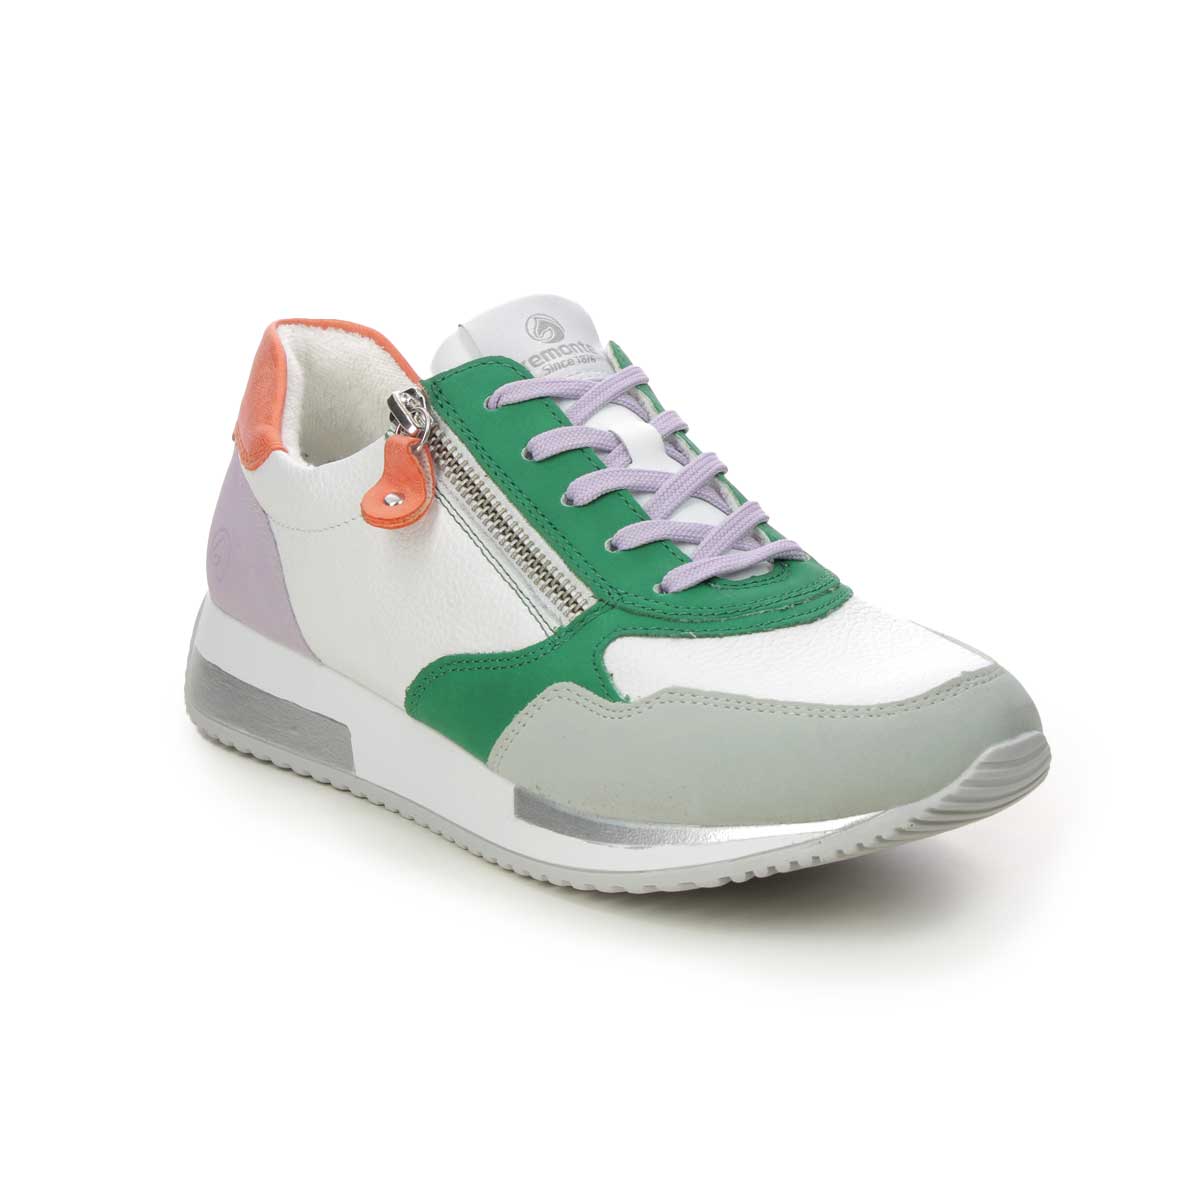 Remonte D0H01-83 Vapod Zip White multi Womens trainers in a Plain Leather and Man-made in Size 38